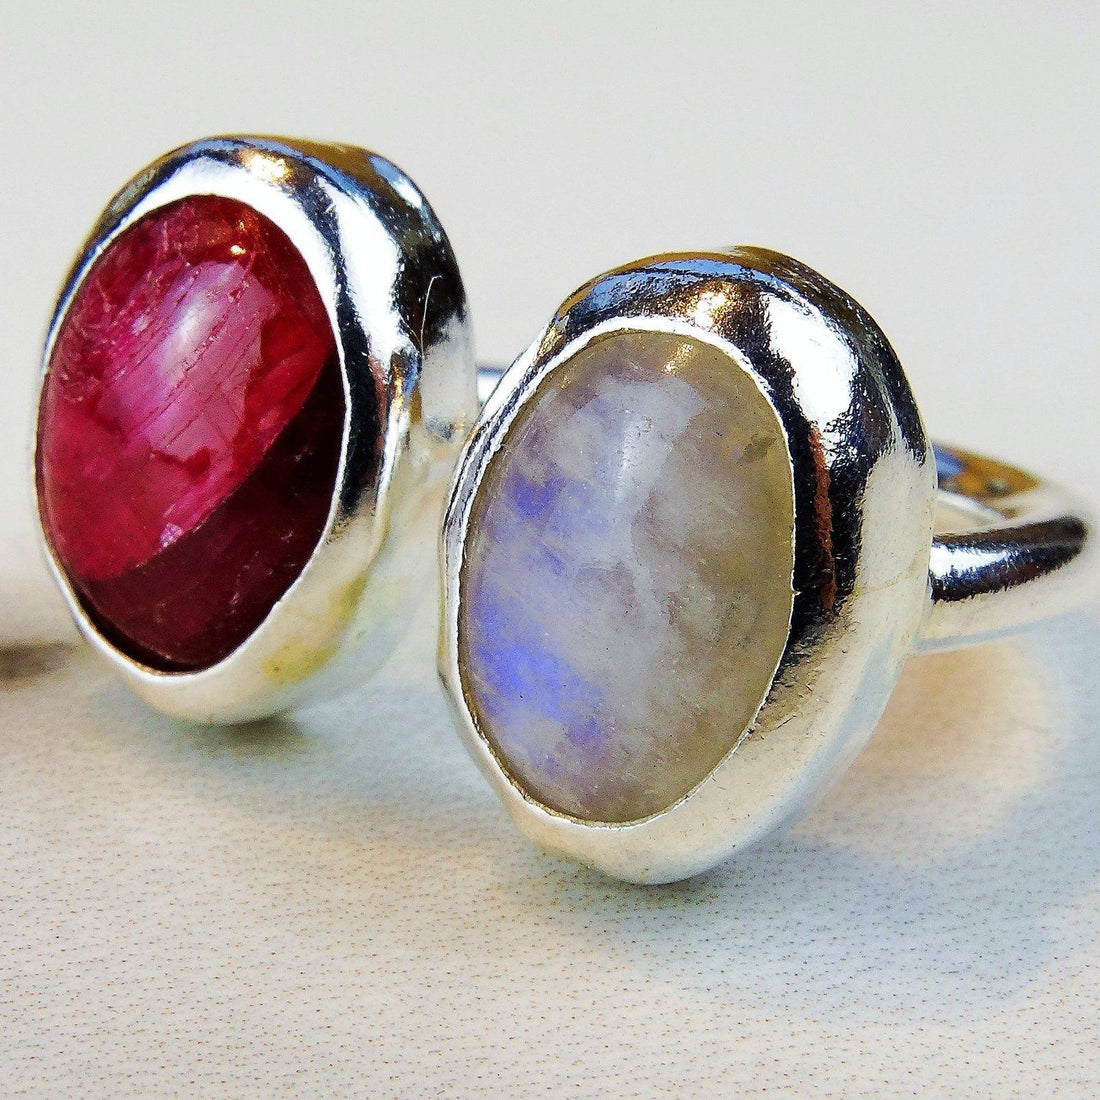 Rubies! July’s birthstone as well as 15th & 40th Anniversary gift